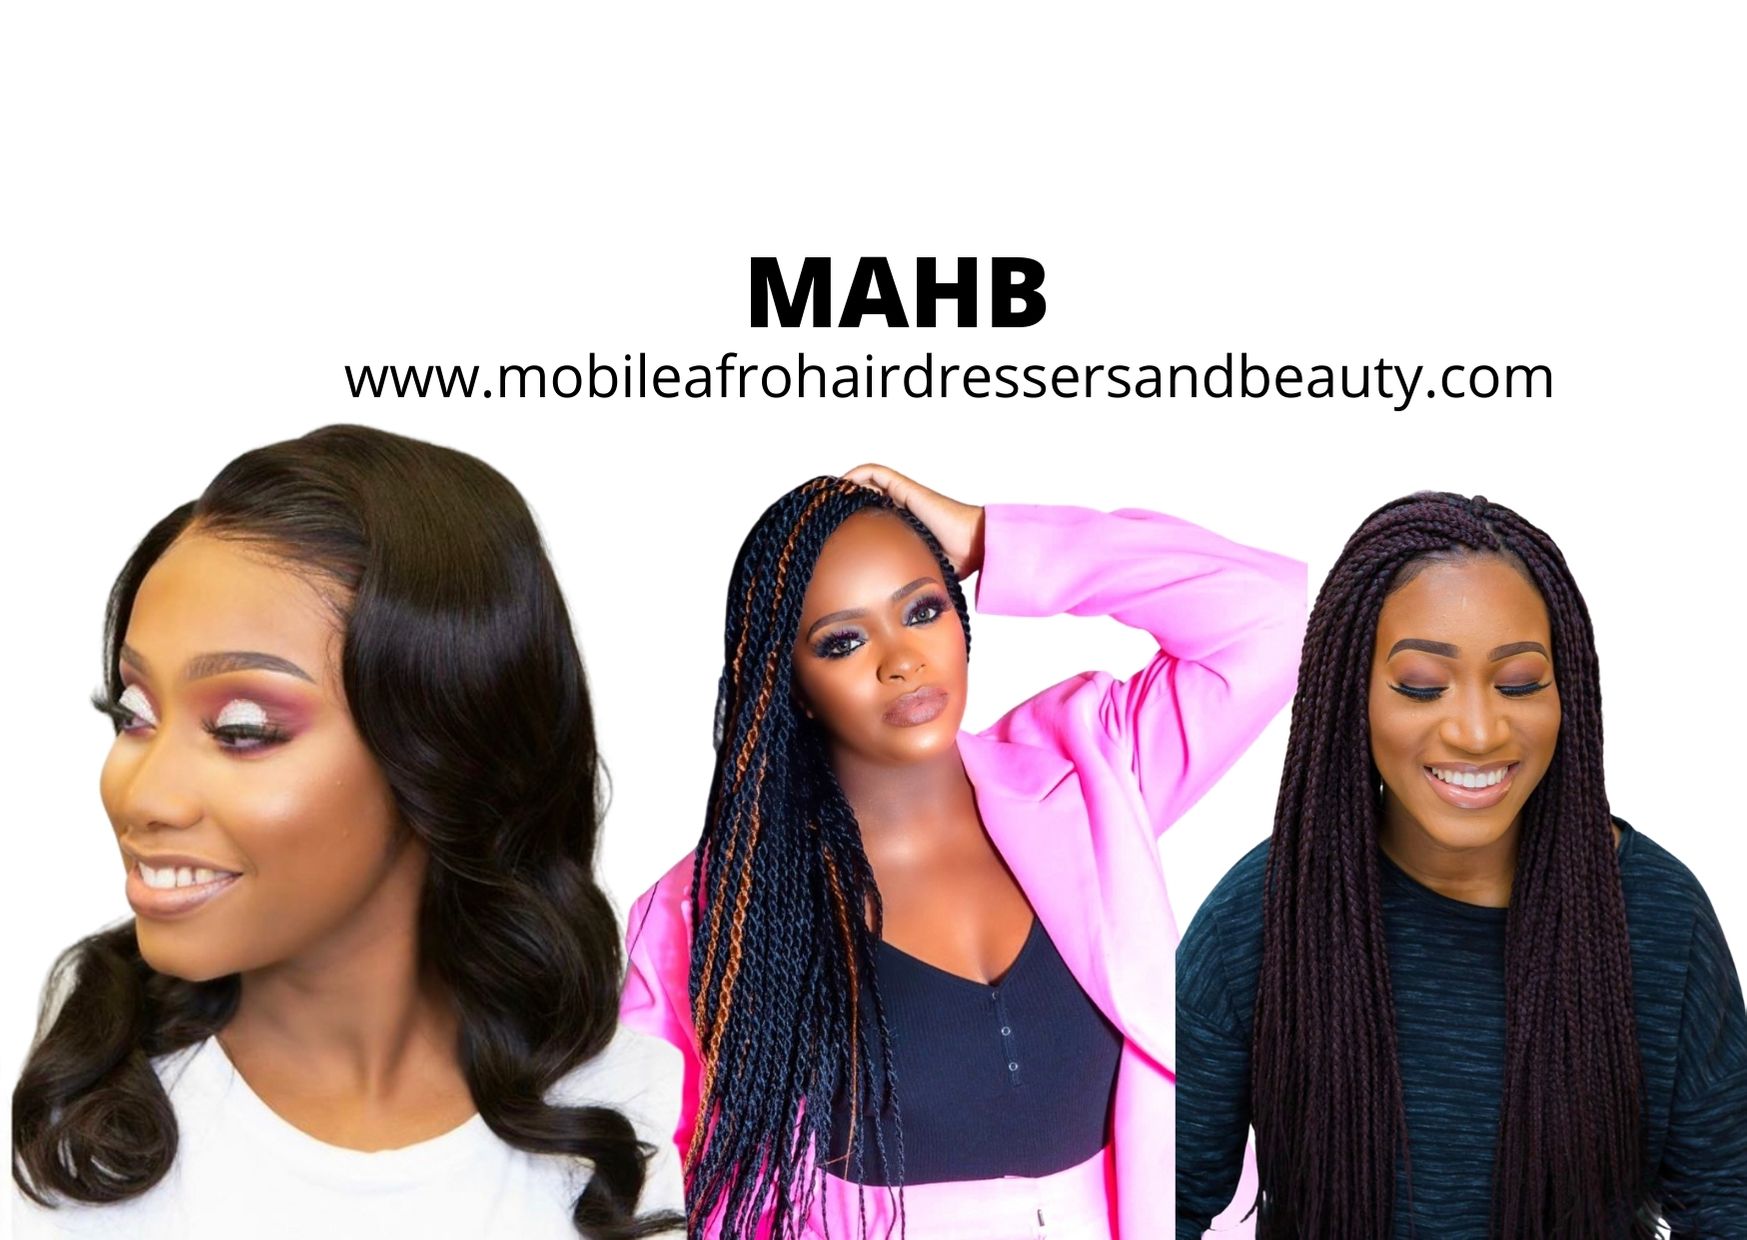 MOBILE AFRO HAIRDRESSERS AND BEAUTY UK SERVICES AND PRICELIST WITH PICTURES